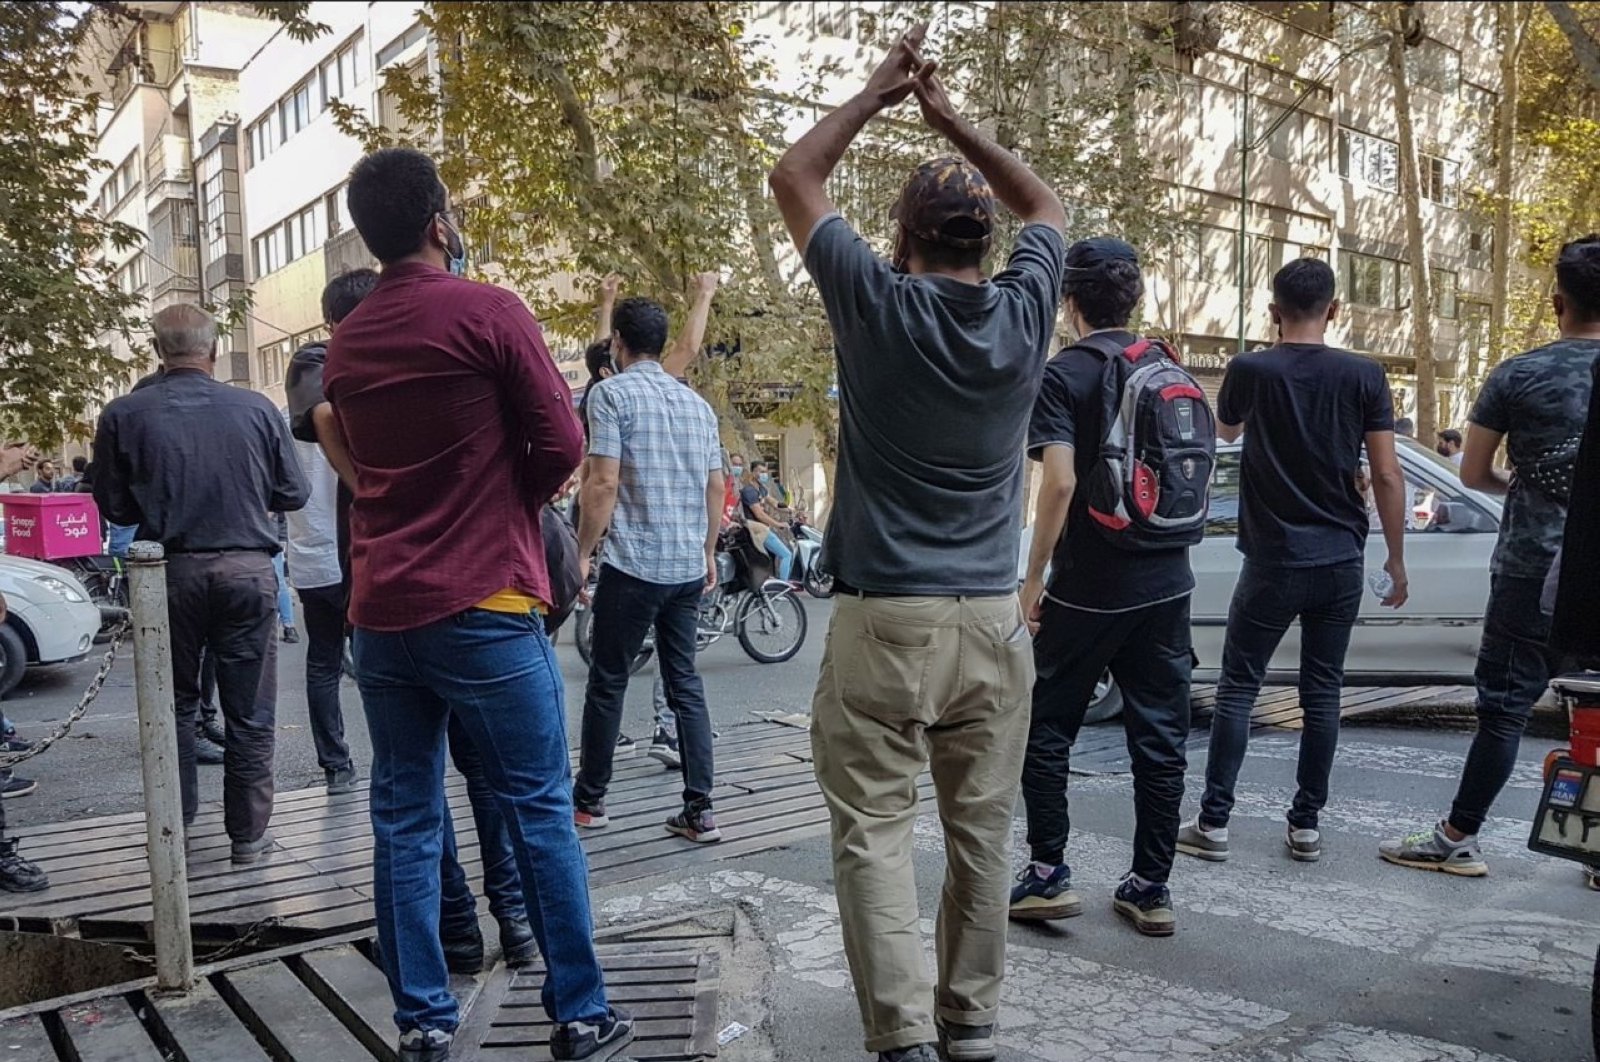 A Time Bomb Anger Rising In A Hot Spot Of Iran Demonstrations The Local Read 